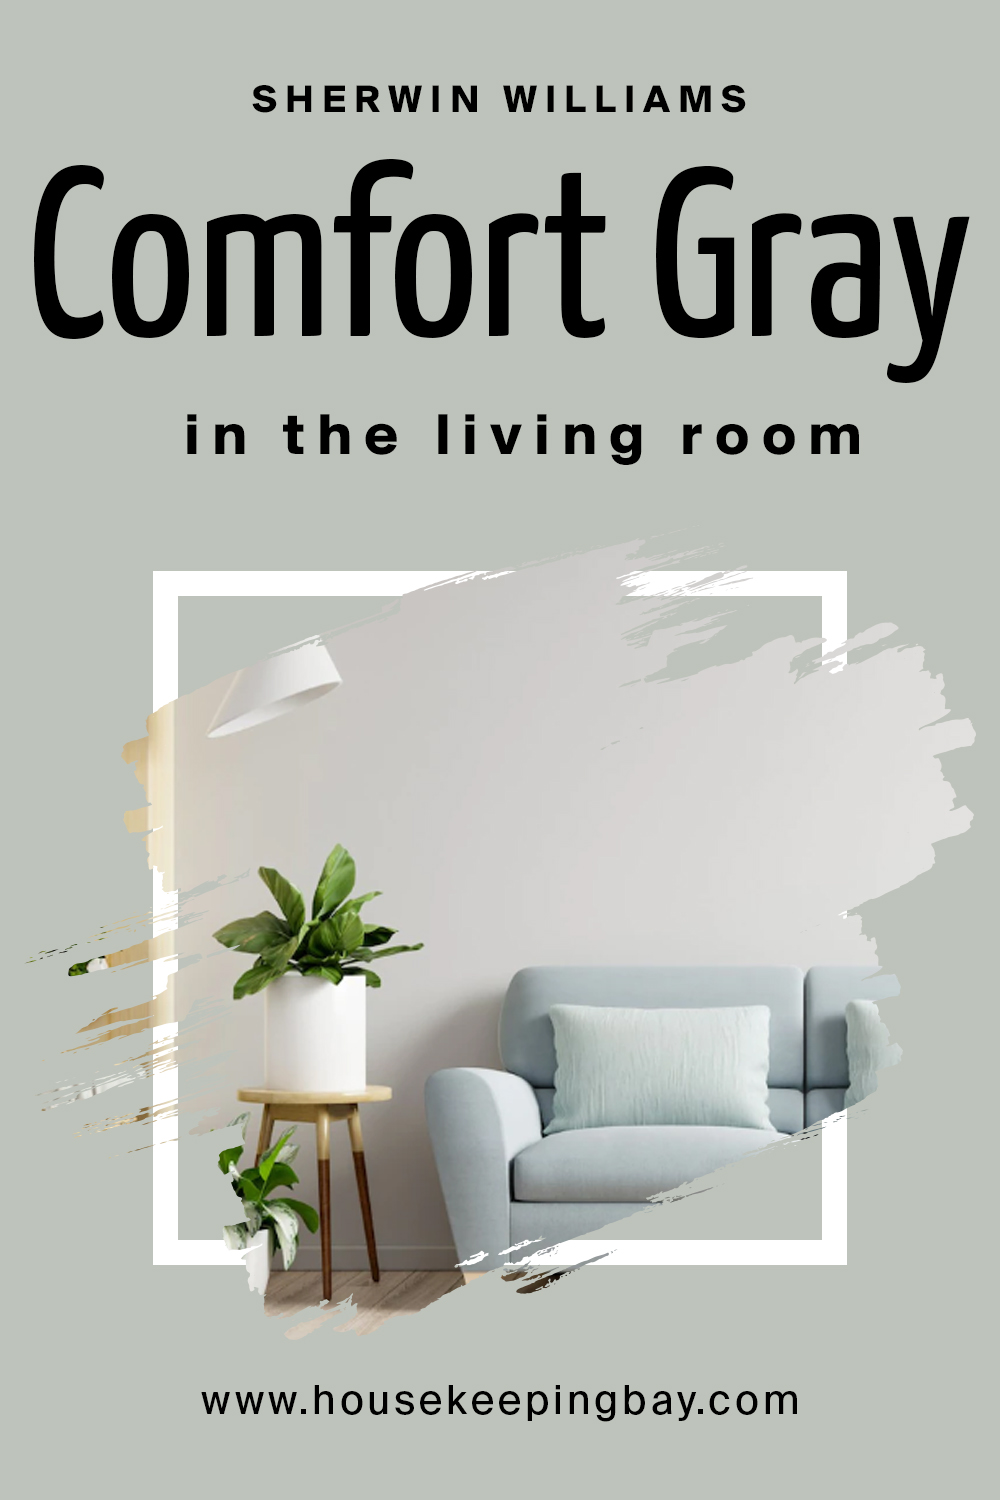 Sherwin Williams. Comfort Gray In the Living Room